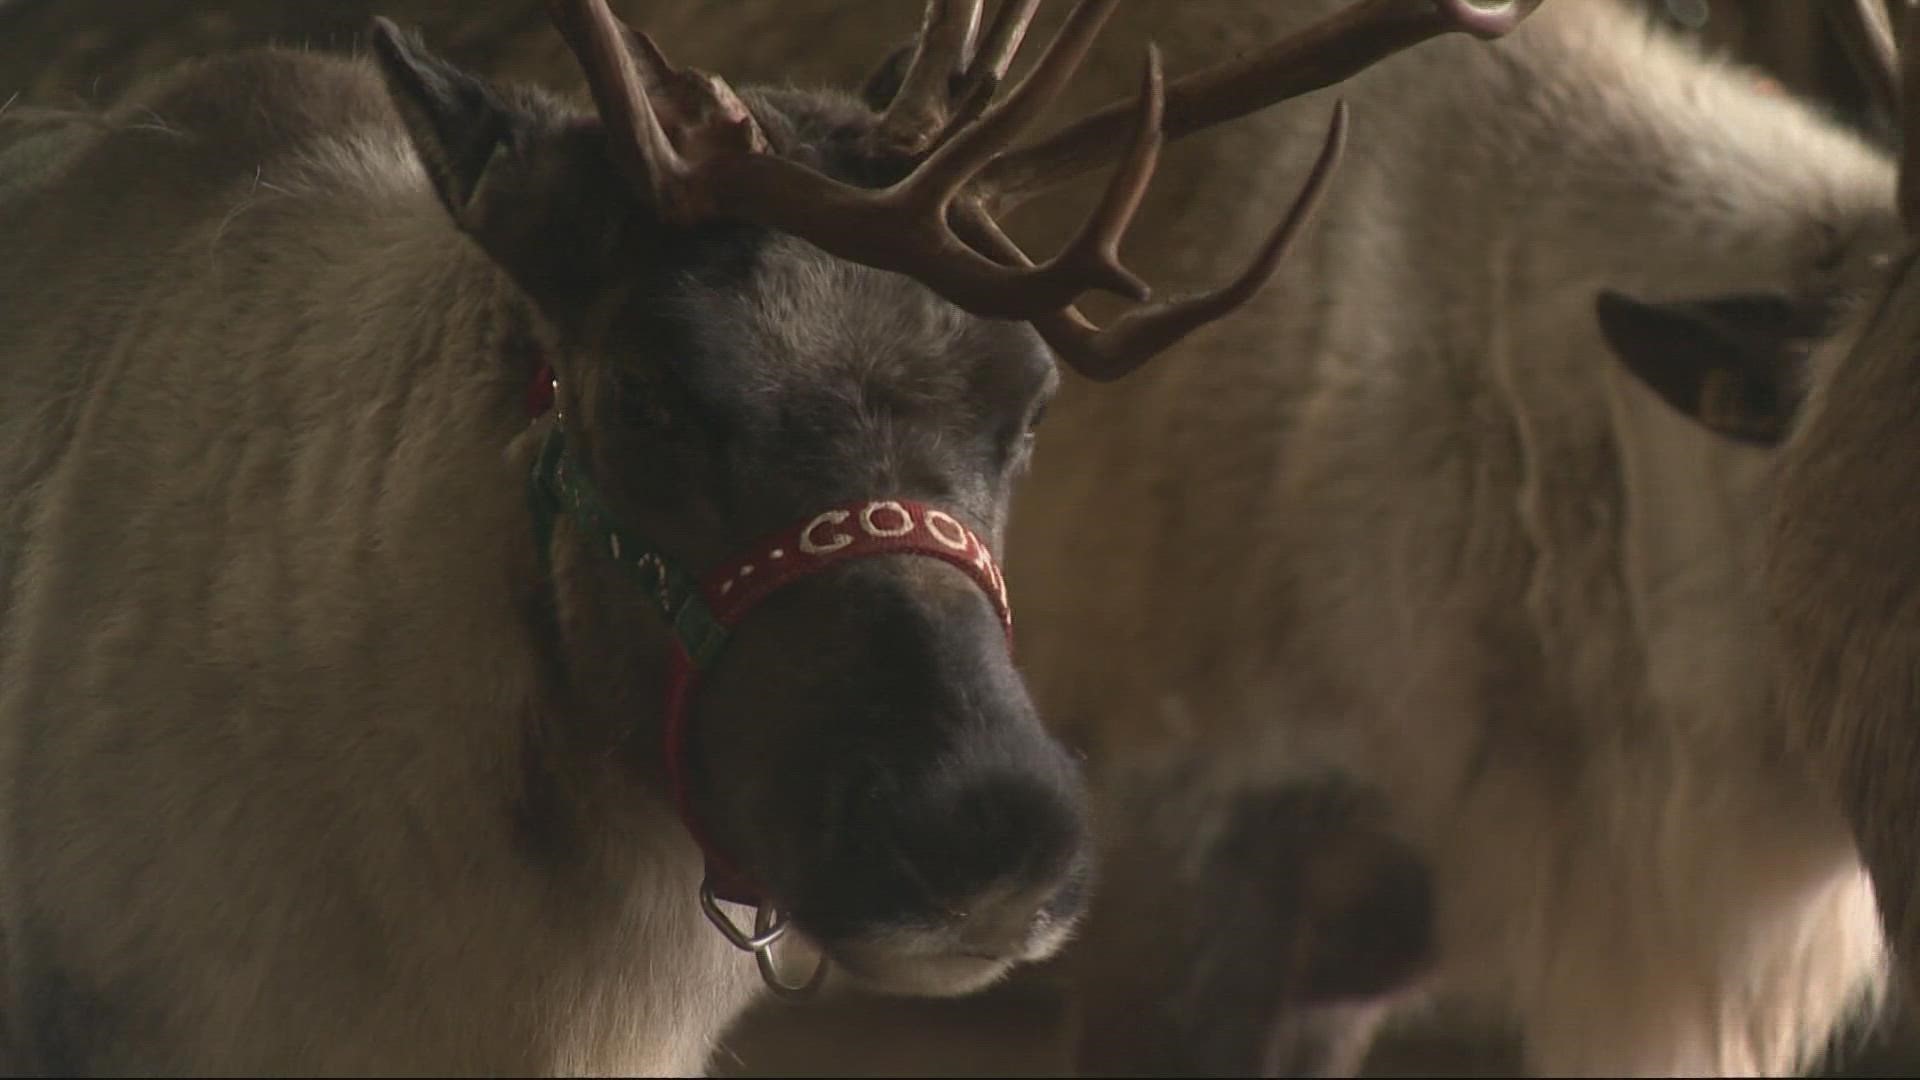 Timberview farm is the only licensed reindeer farm in Oregon. Right now they have nine of the famed animals, and they tend to show up during the holidays.